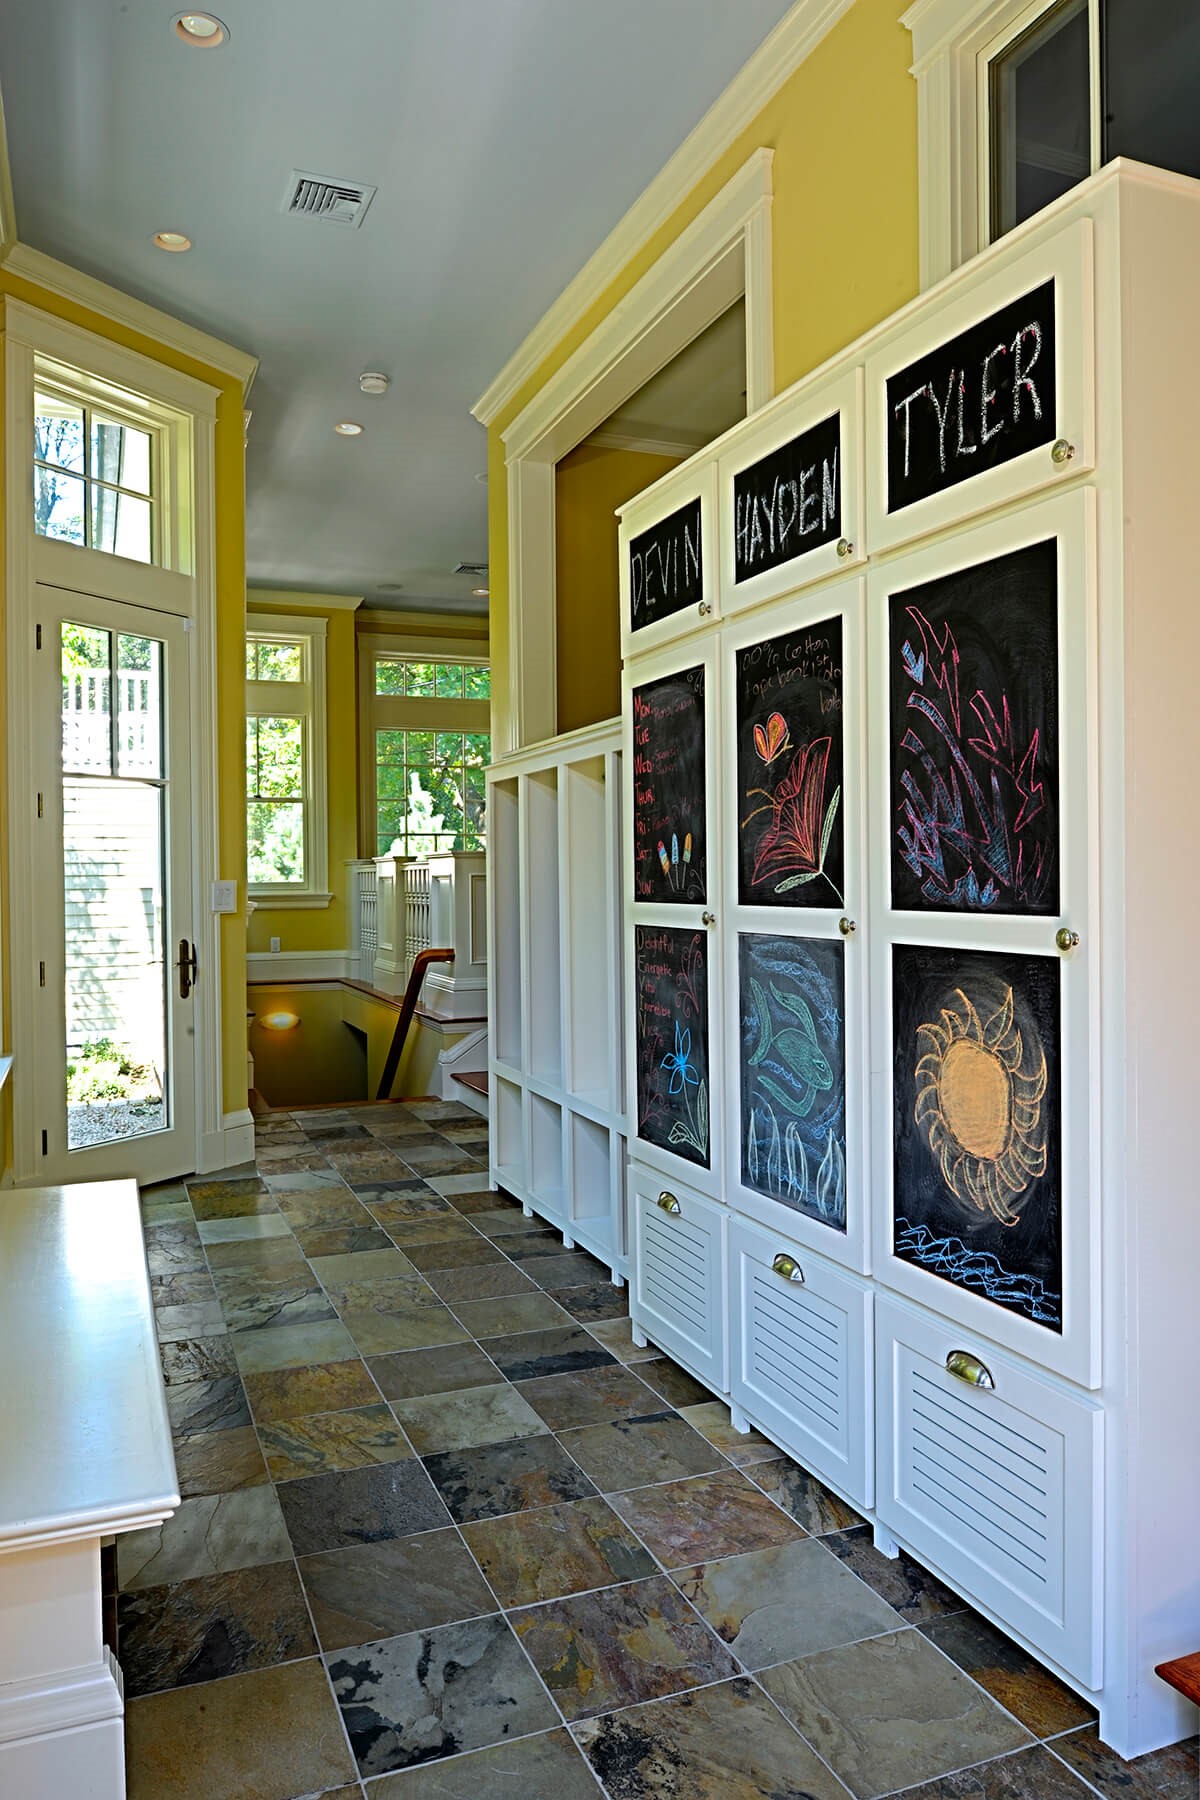 9 Chalkboards for Personalized Closets Simphome com